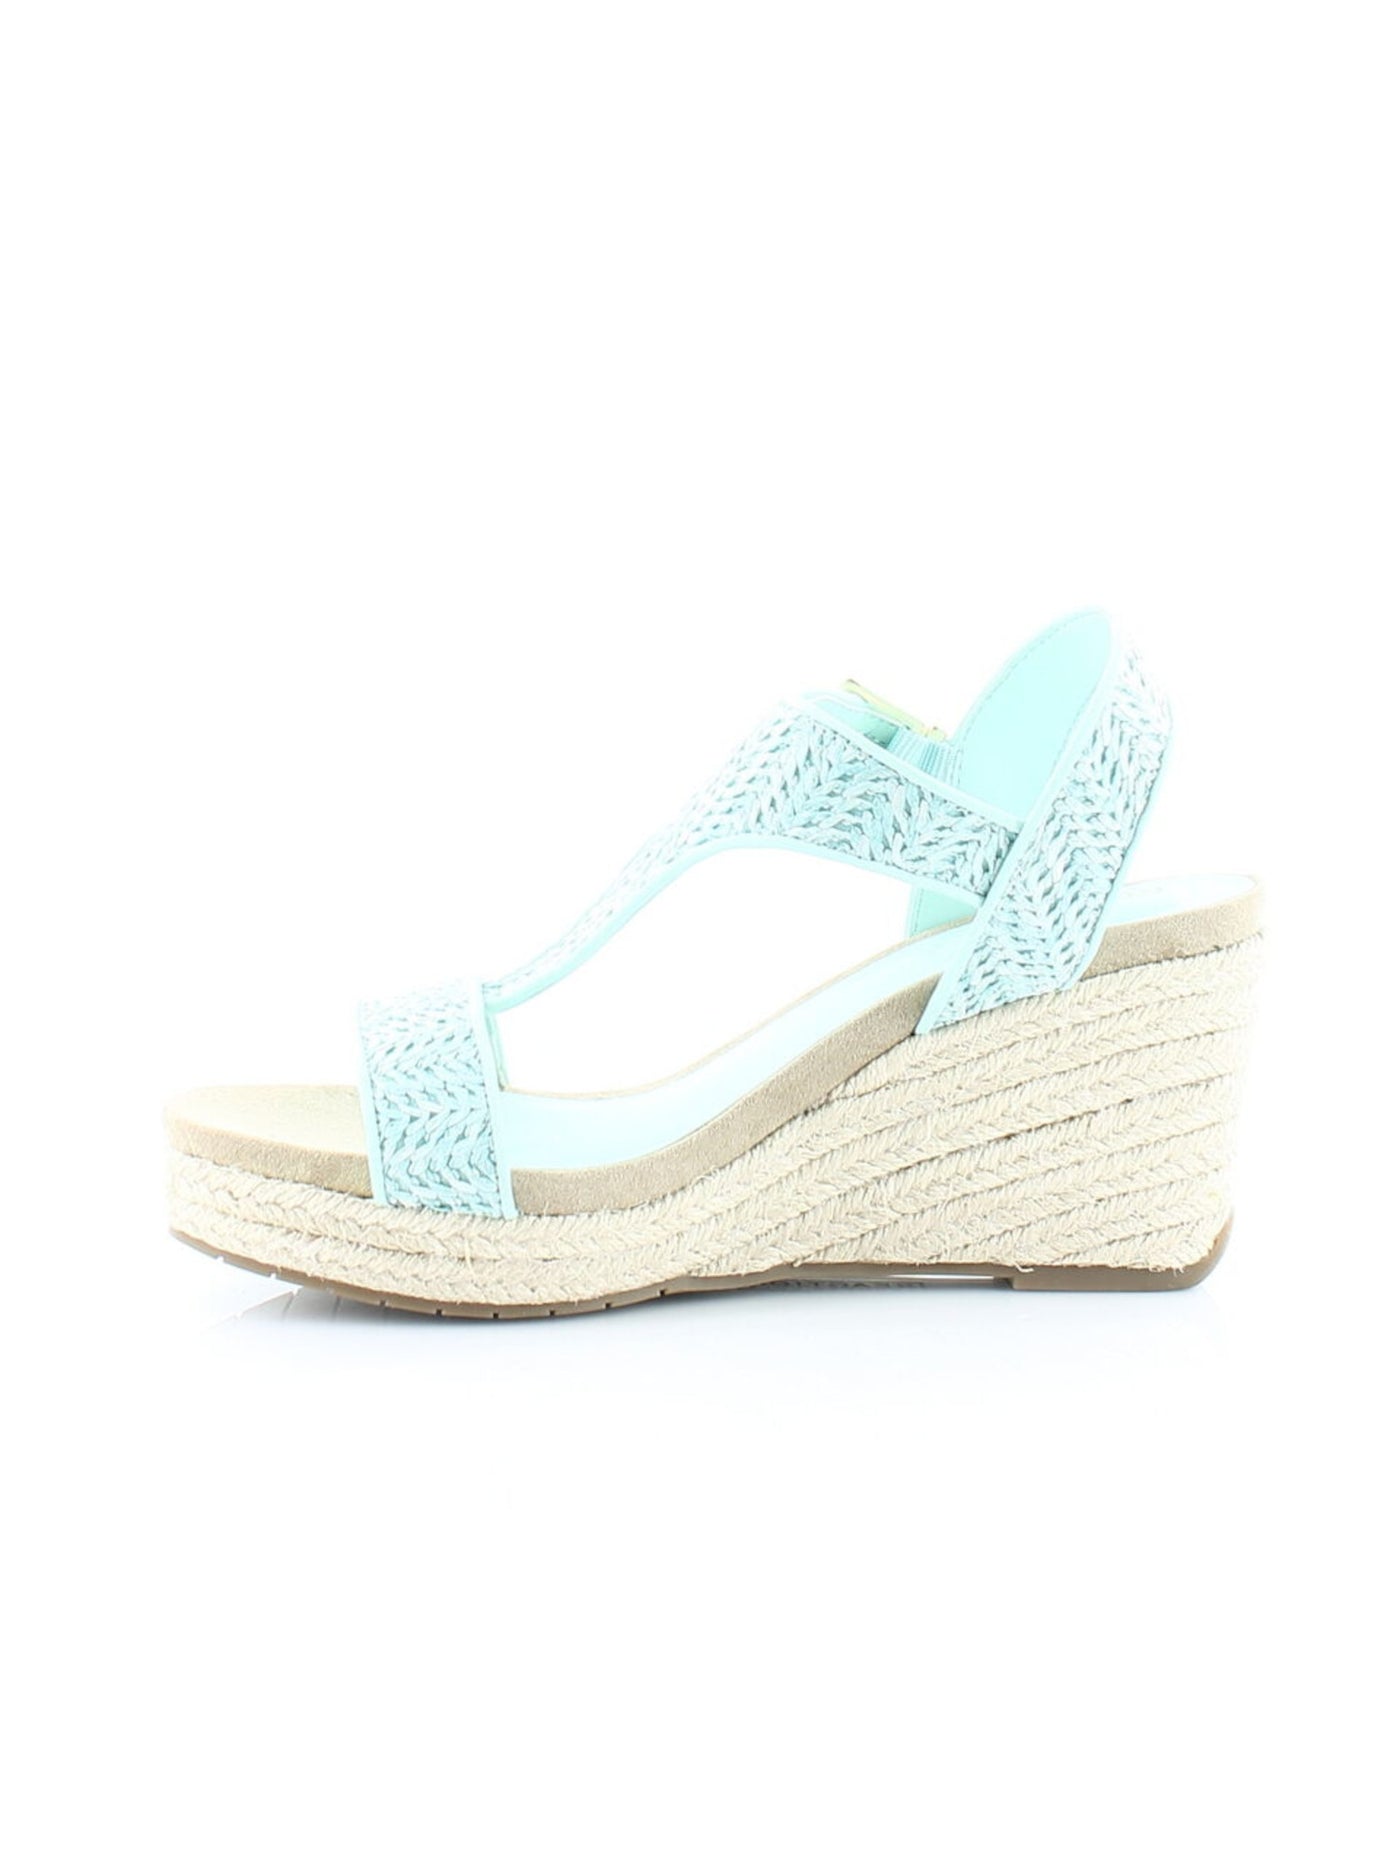 REACTION KENNETH COLE Womens Aqua Woven Adjustable Card Round Toe Wedge Buckle Espadrille Shoes 7.5